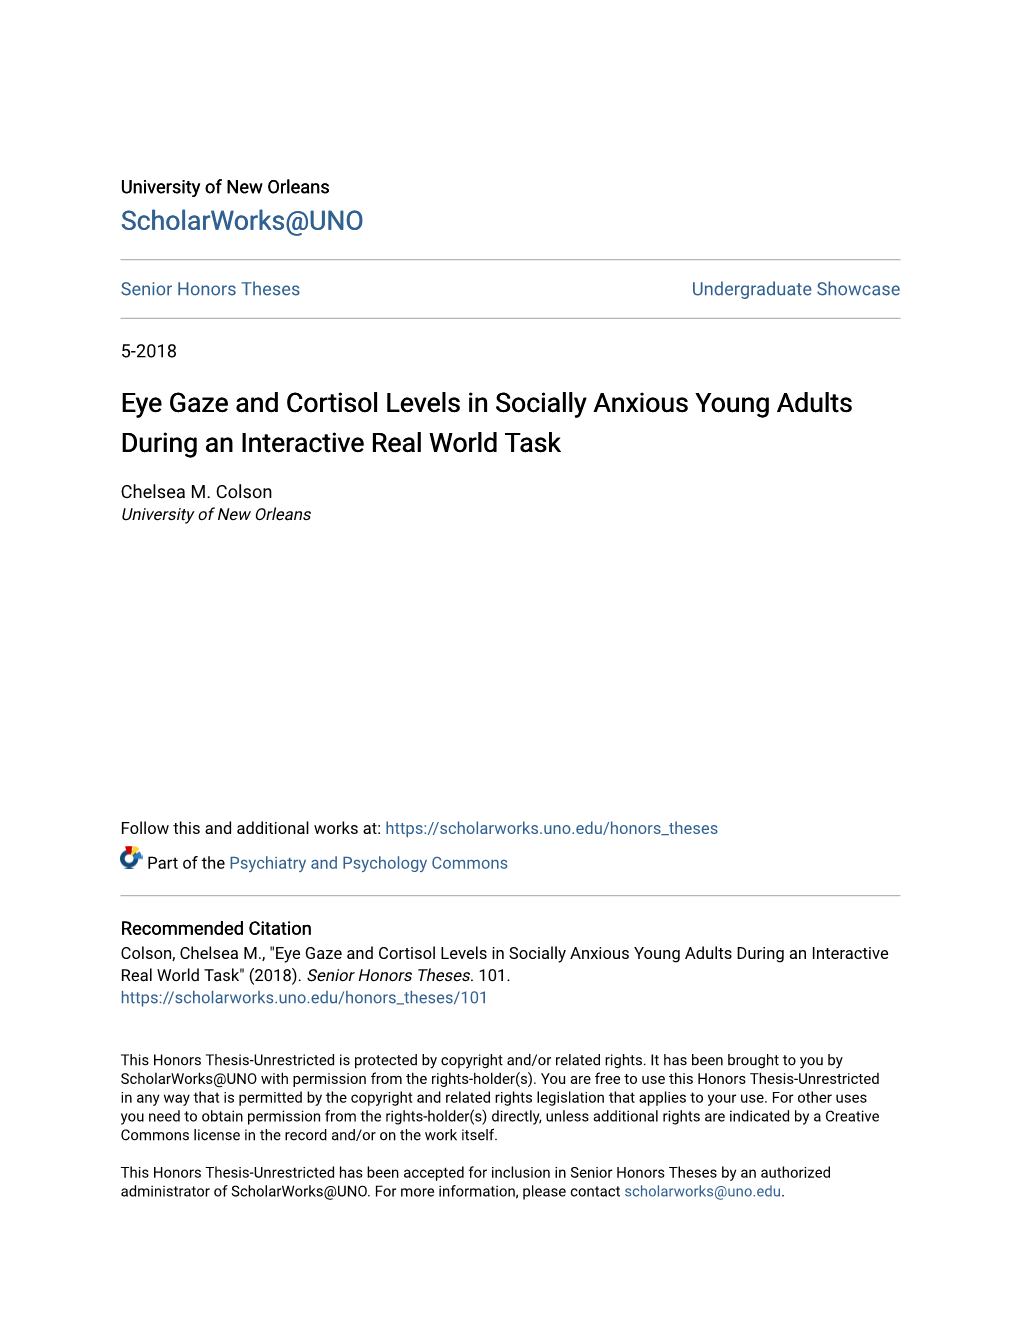 Eye Gaze and Cortisol Levels in Socially Anxious Young Adults During an Interactive Real World Task